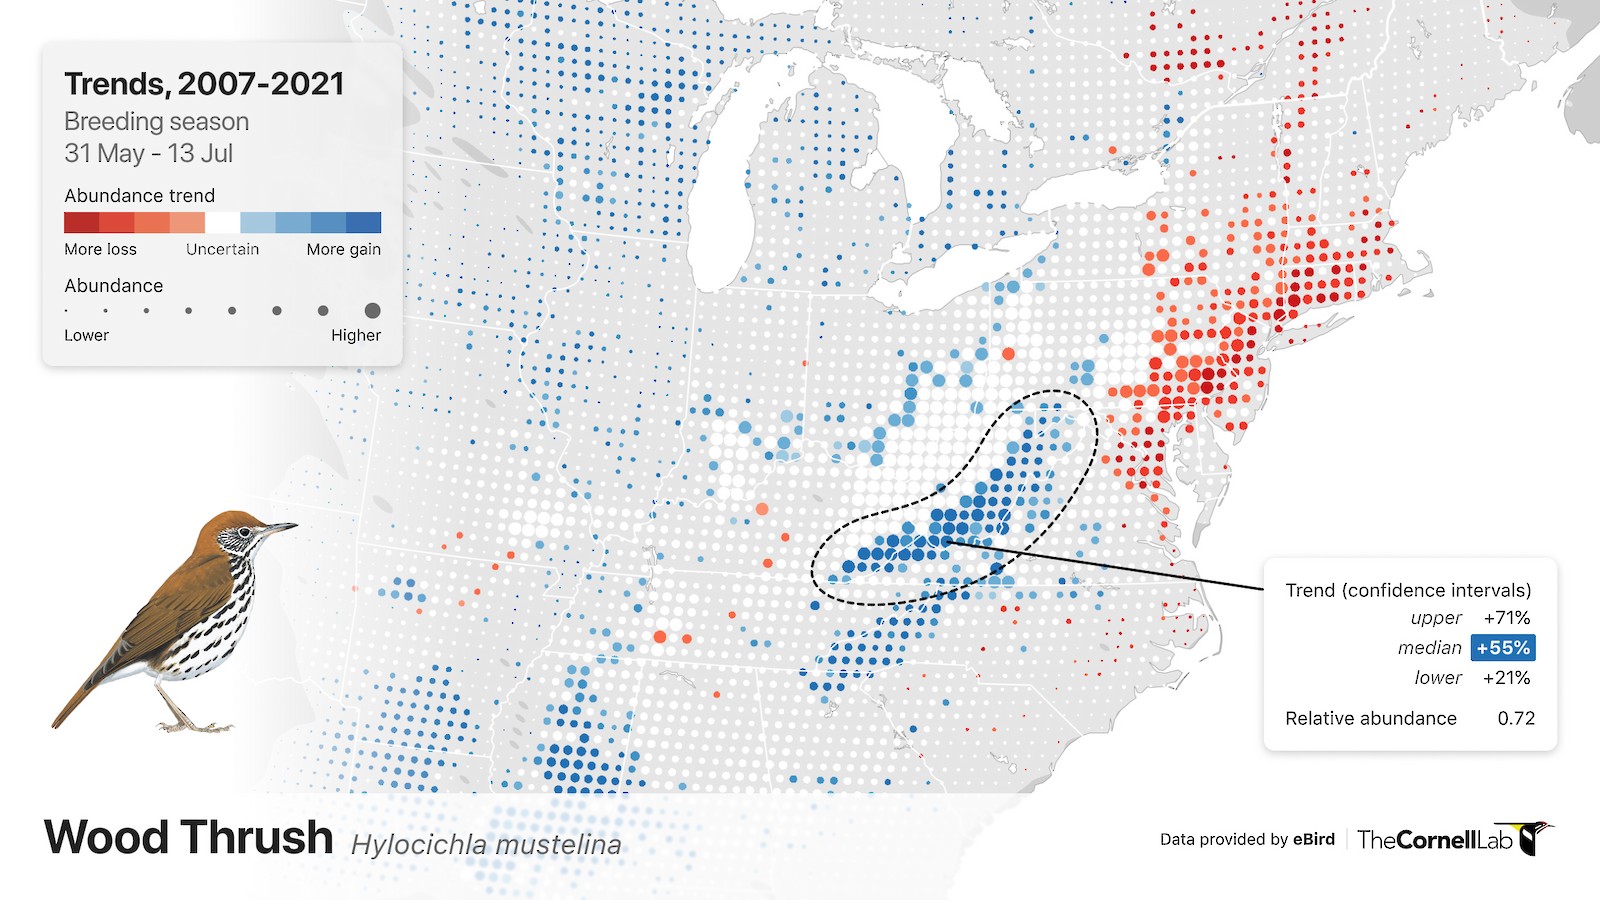 Map of the eastern U.S. with red dots indicating populations declines and blue dots indicating population increases for Wood Thrush. 